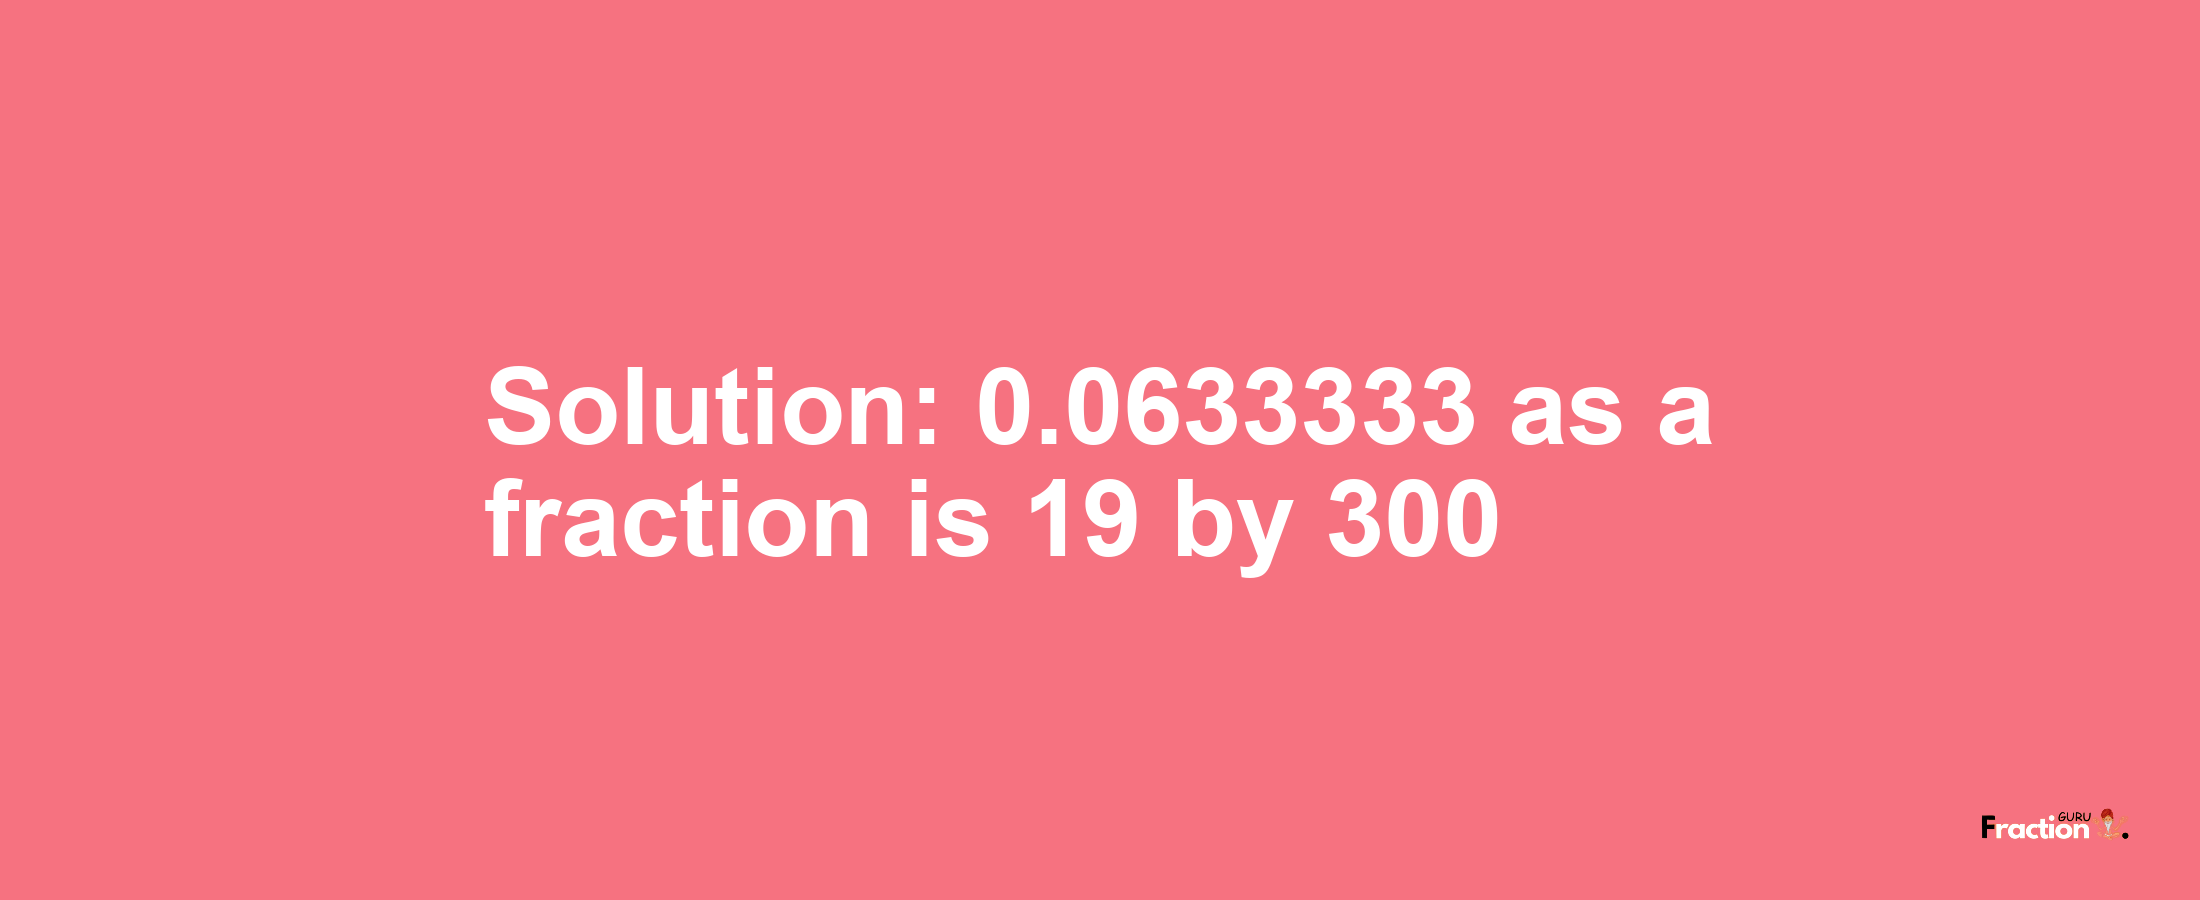 Solution:0.0633333 as a fraction is 19/300